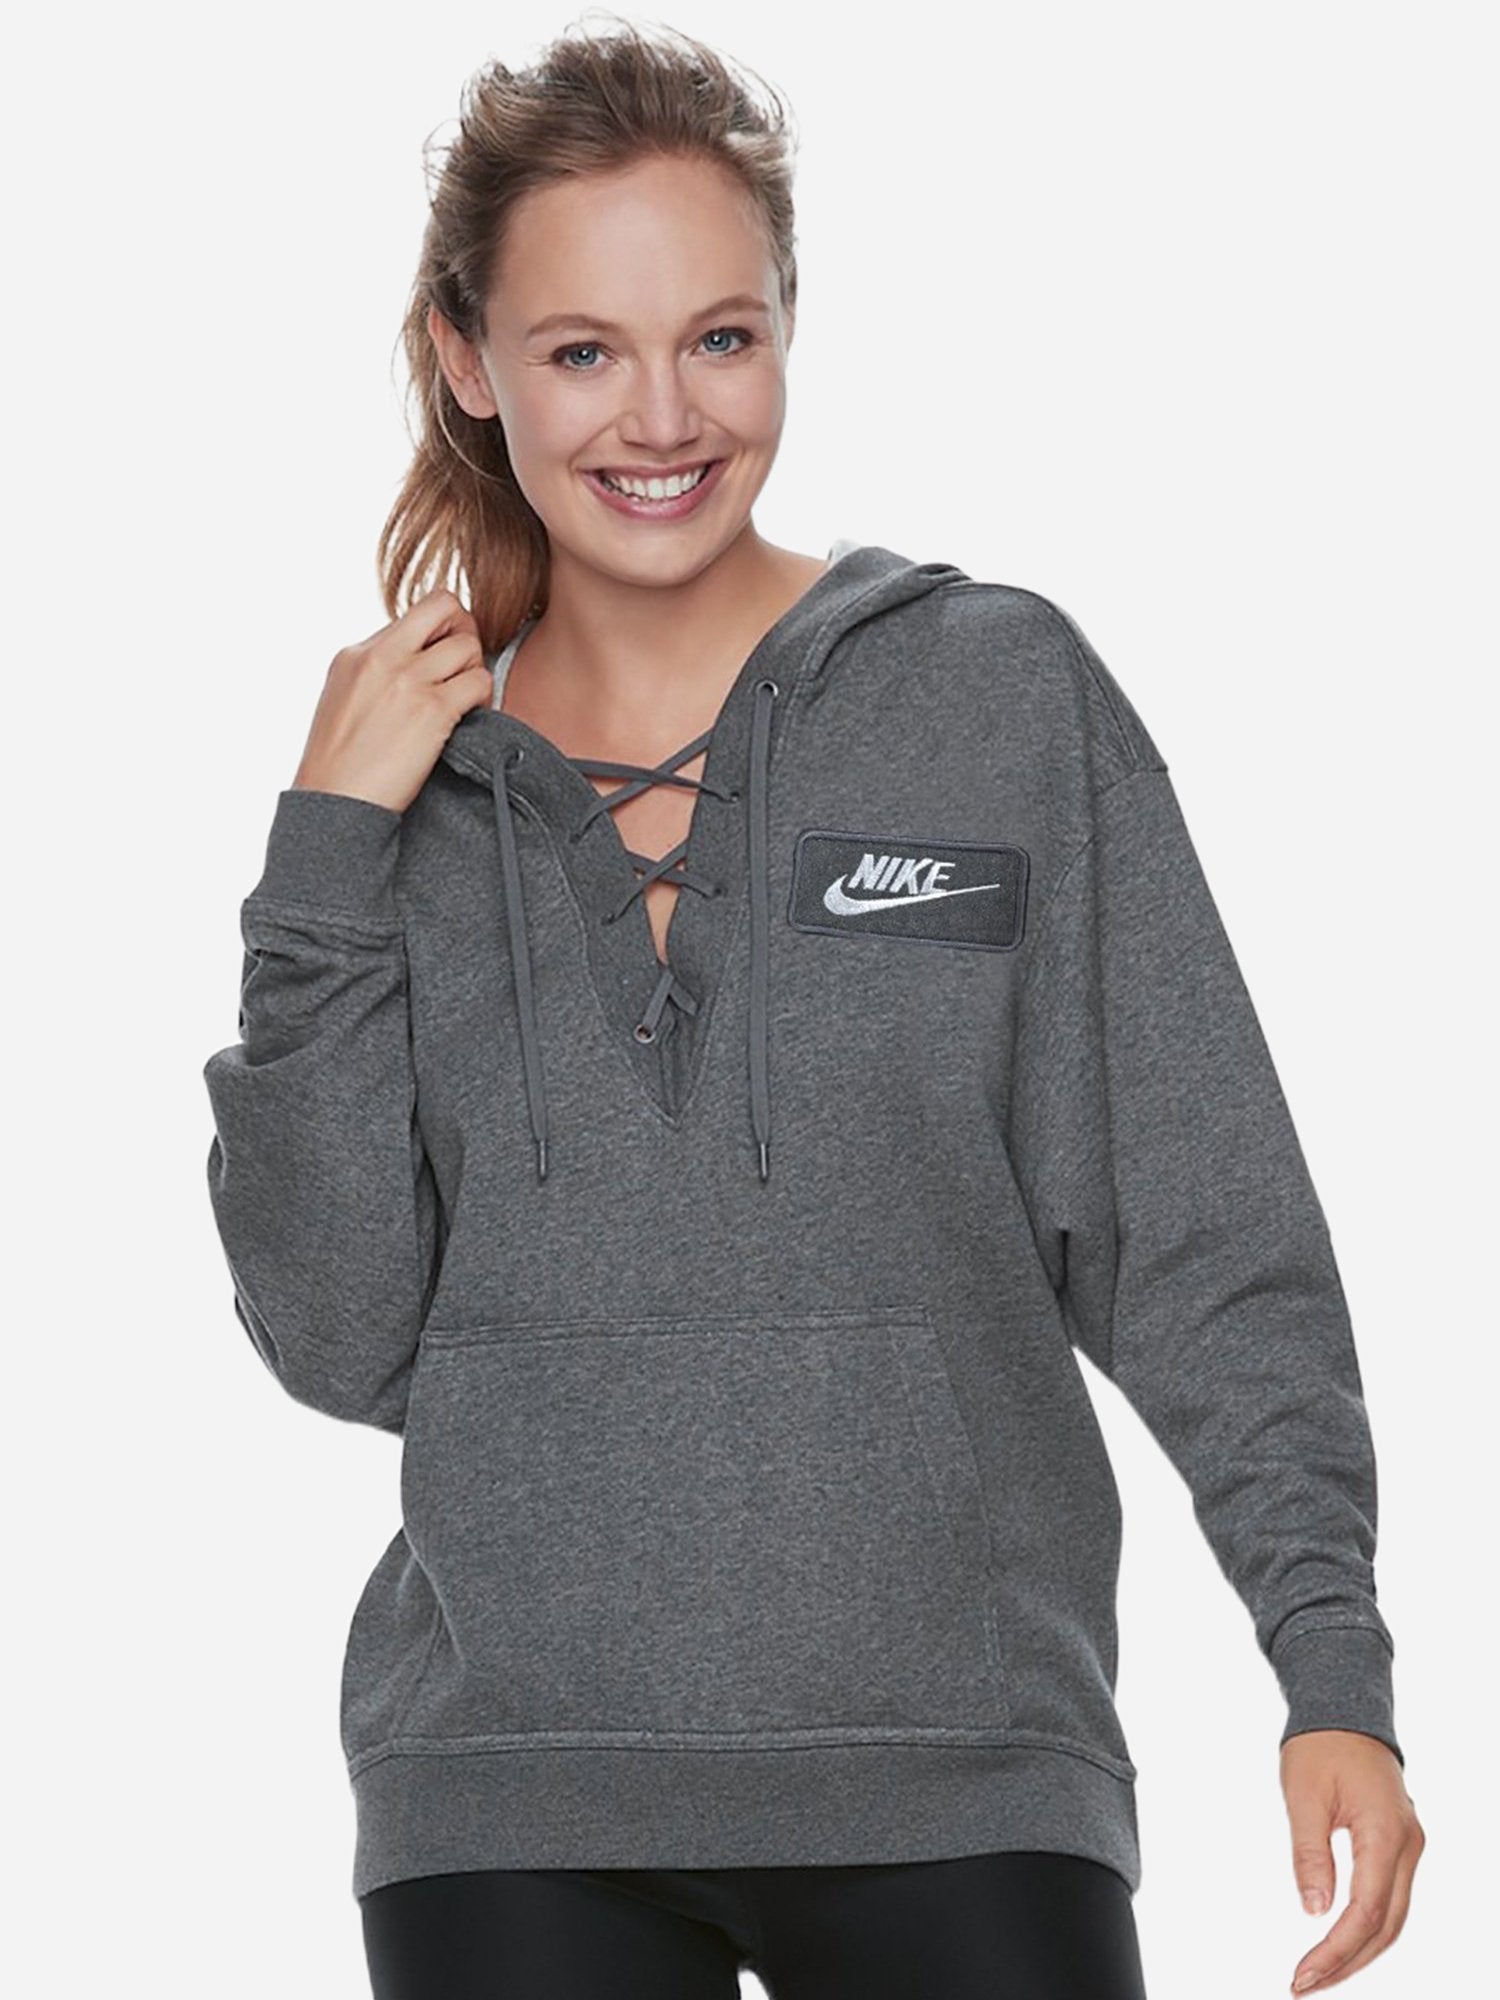 NK Terry Fleece Lace Up Hoodie For Ladies-Charcoal Melange-SP419